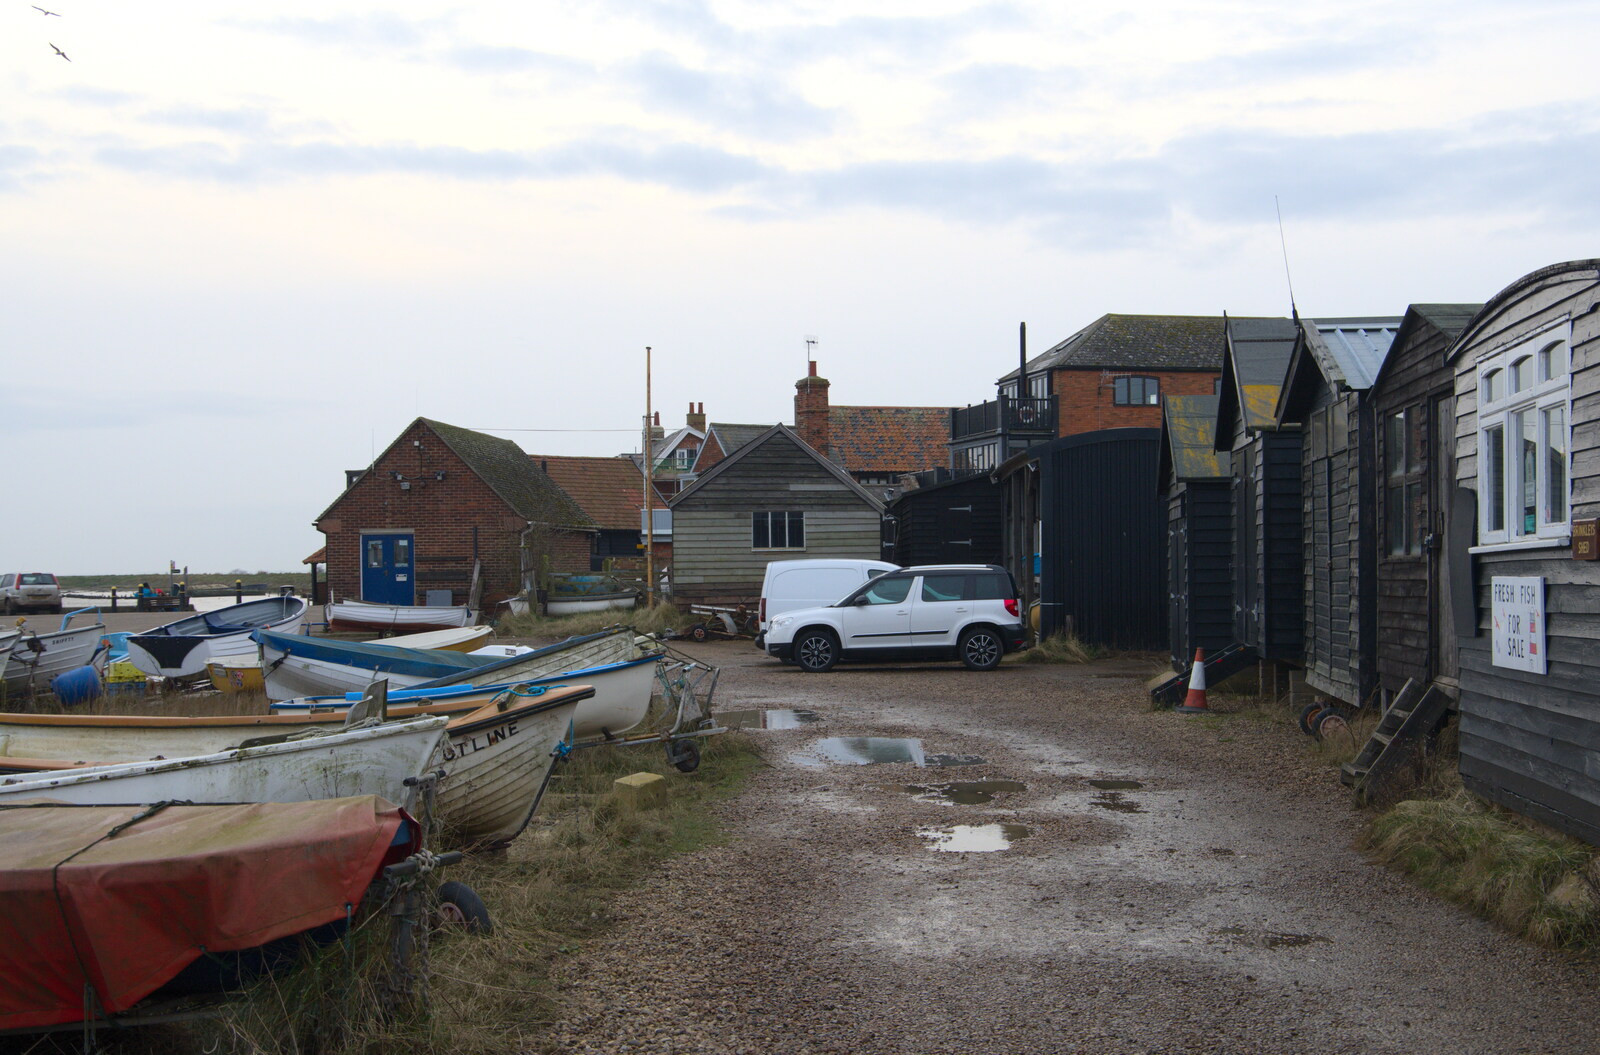 A Trip to Orford, Suffolk - 25th January 2020: Orford quay boatyard